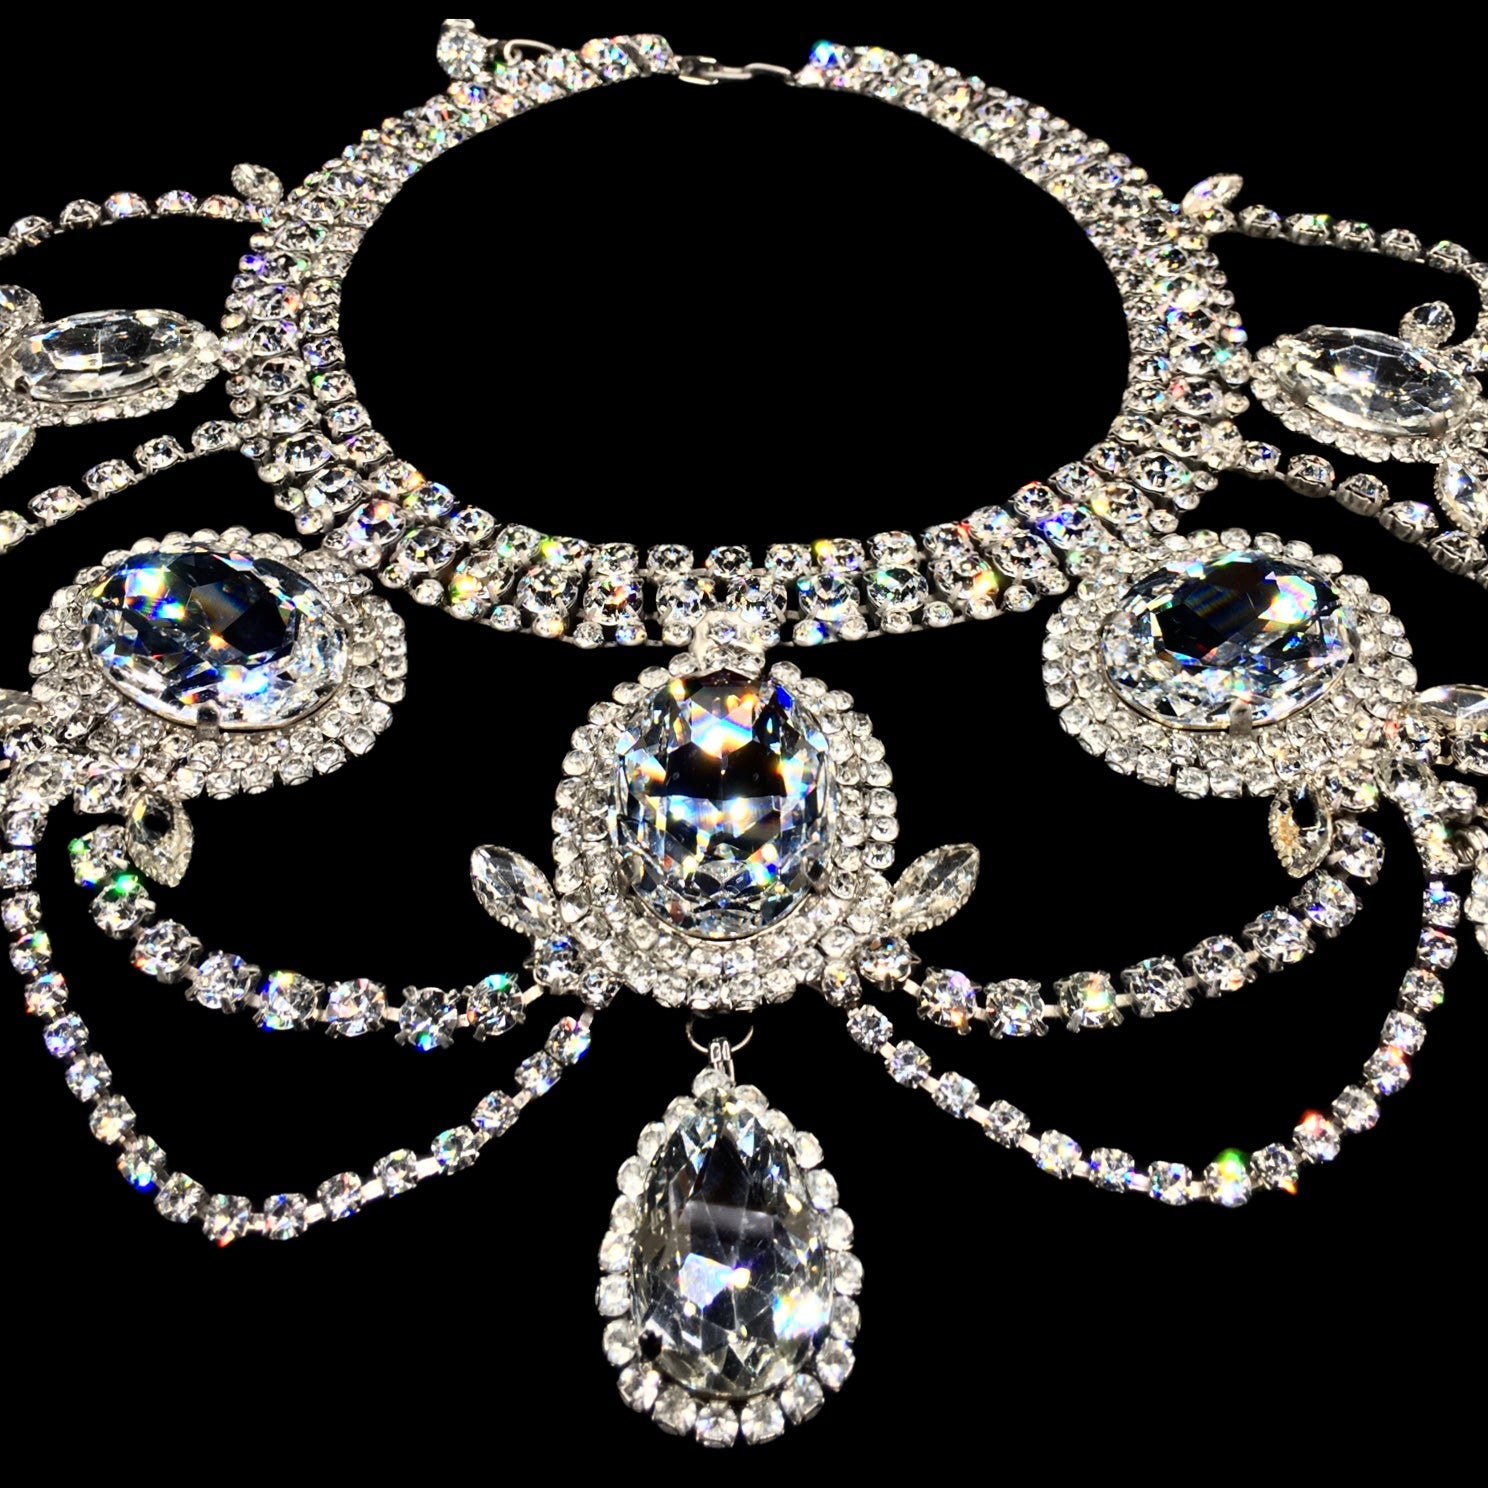 Necklace Large Regal Oval Clear Crystals